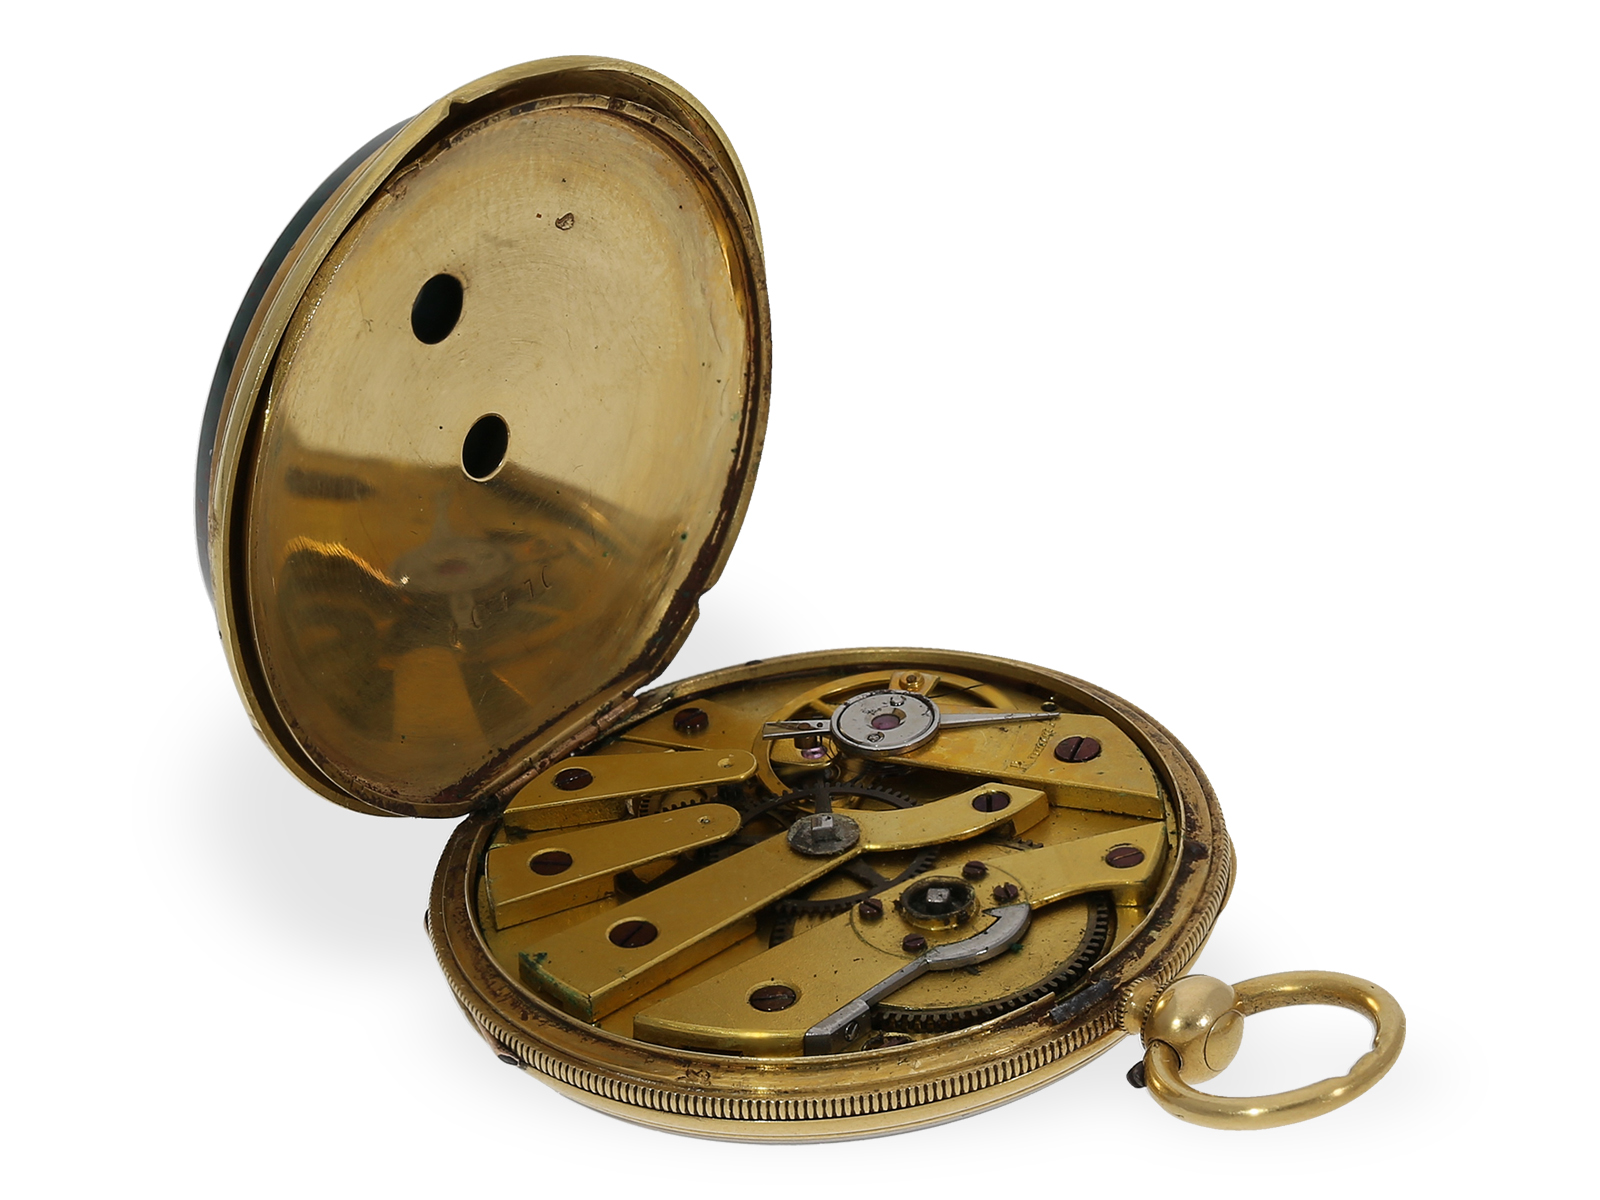 Pocket watch: rare lepine with gold/jasper case and gold/jasper chatelaine, ca. 1850 - Image 7 of 8